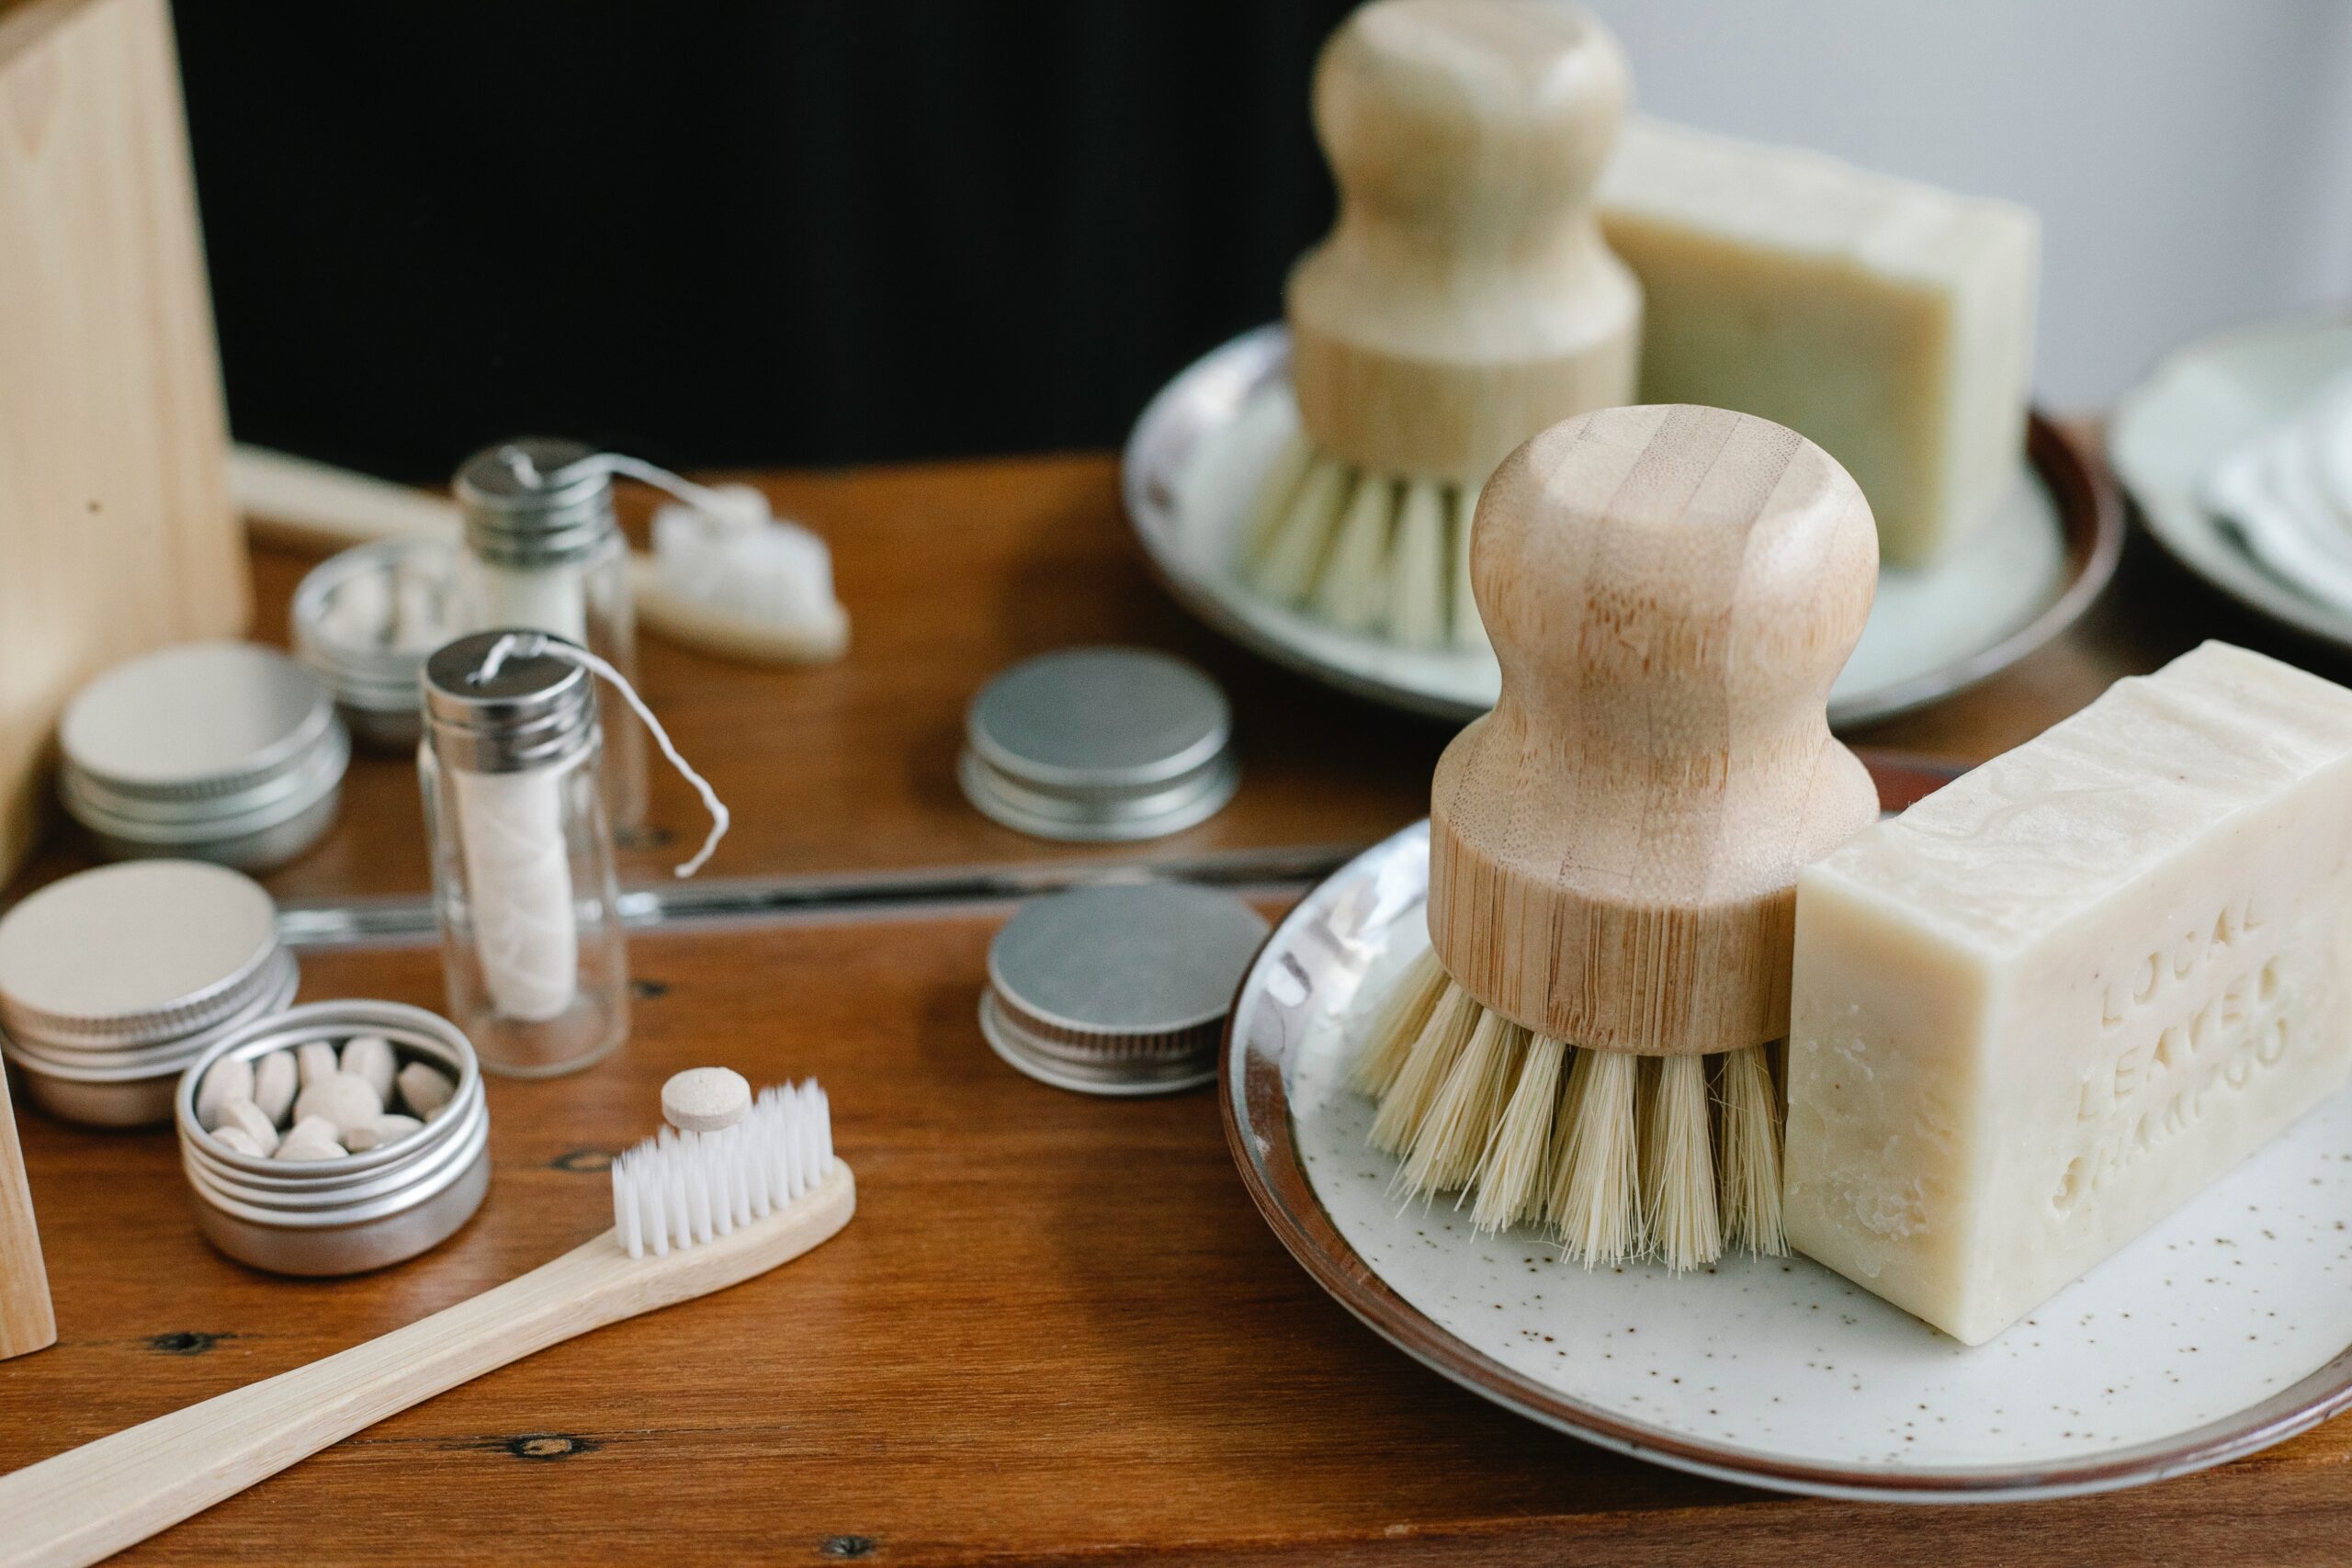 Sustainable toothbrush and other items